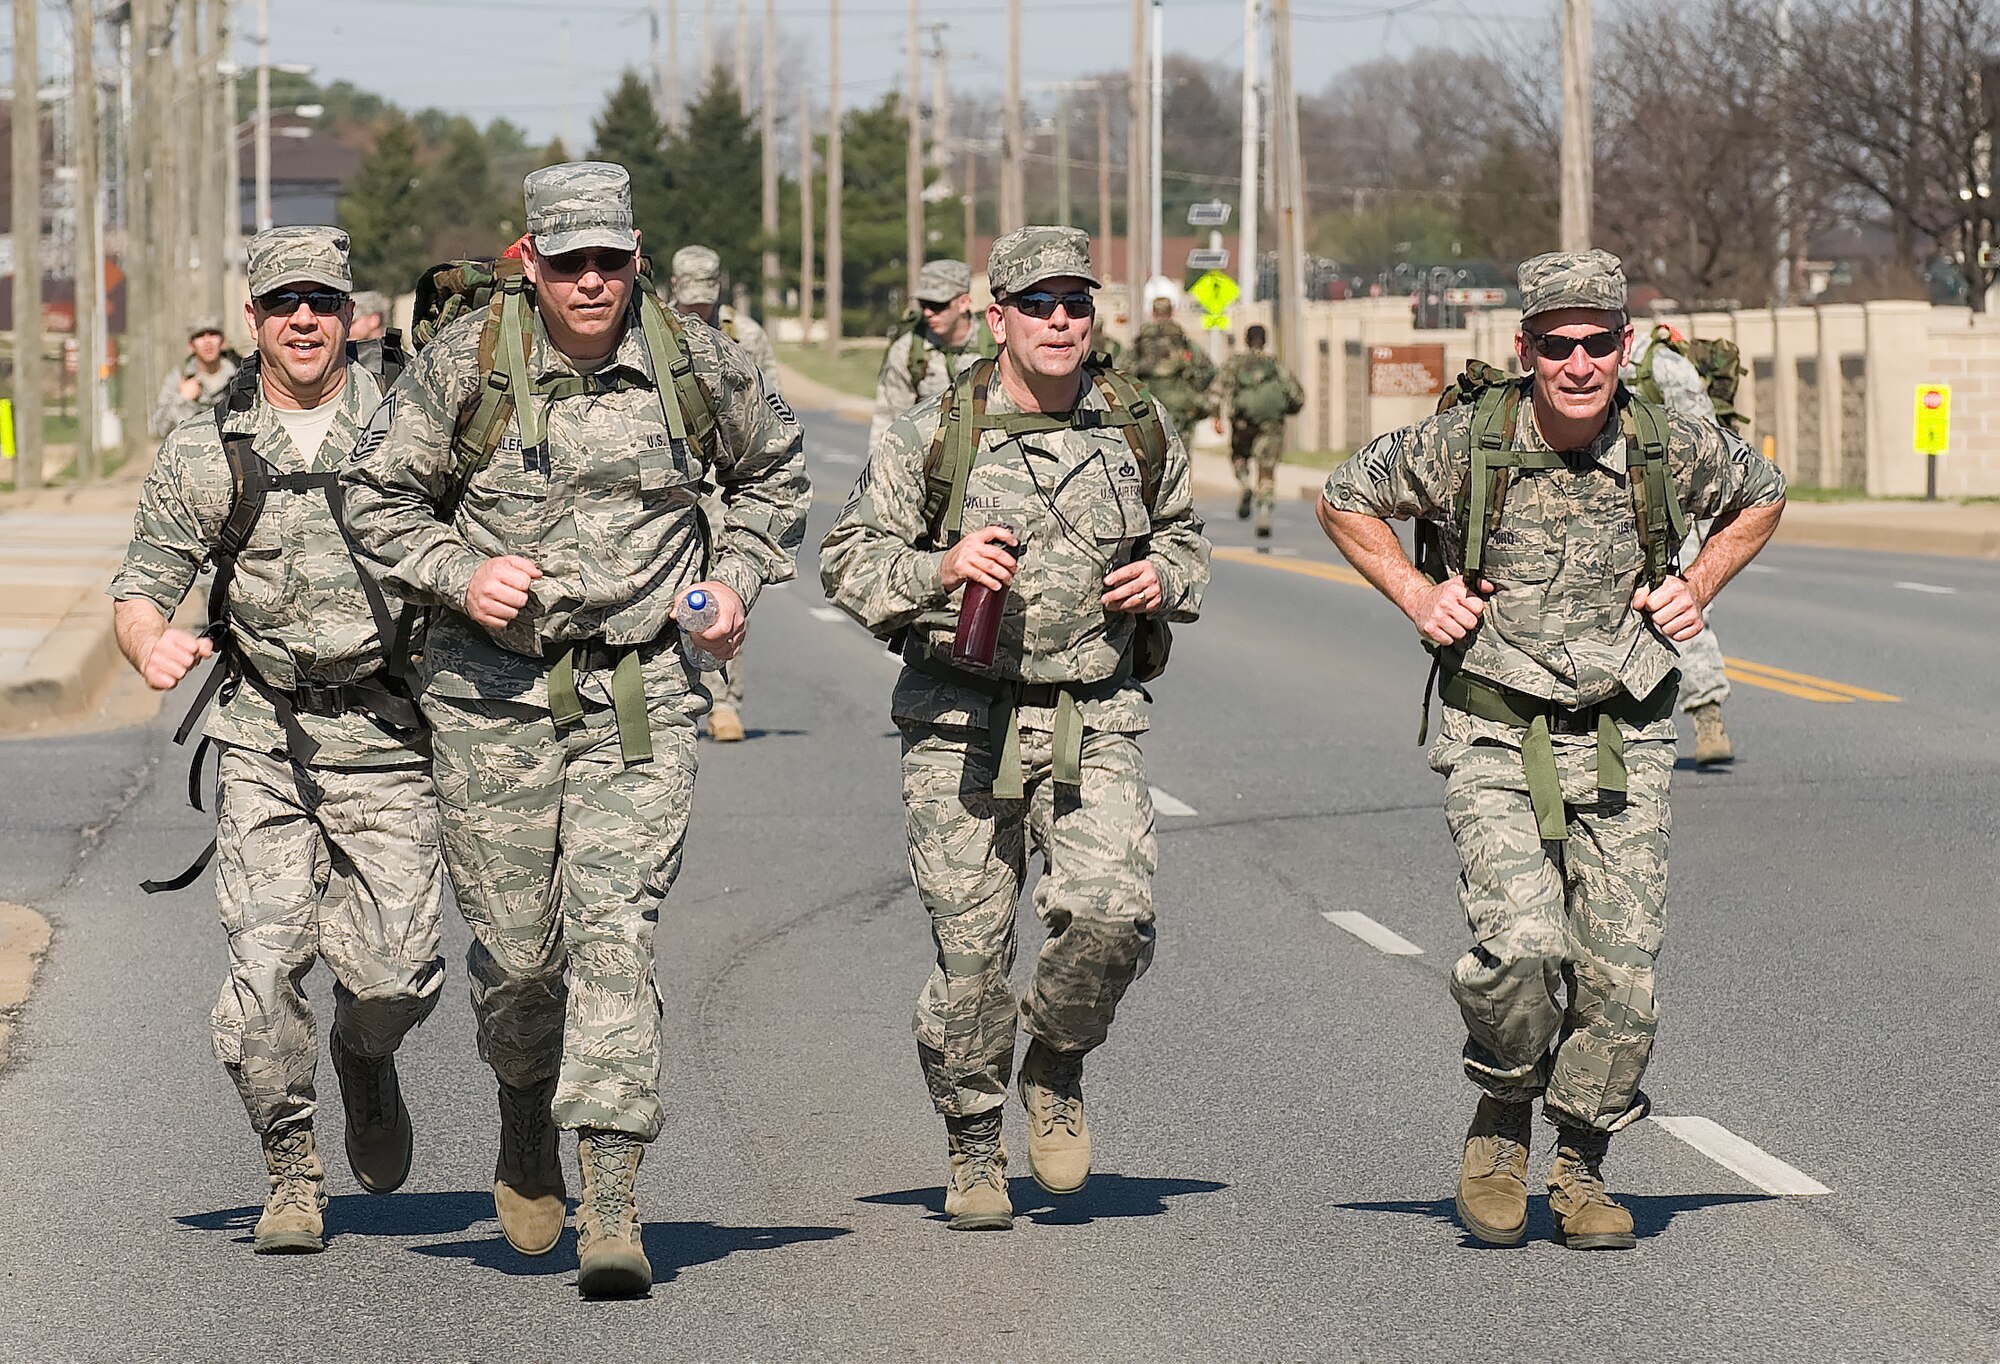 Chief Master Sgt. David Fish (left), Air Force Mortuary Affairs Operations Center enlisted manager, and Senior Master Sgt. James Segler (second from left), AFMAO superintendent, join other senior NCO's during the 436th Security Forces Squadron's 11th Annual Ruck March held March 20.participate in the 436th Security Forces Squadron's 11th Annual Ruck March held March 20. The annual 6.2 mile march is a fundraiser to honor the veterans of the Korean War who fought in the Battle of the Chosin Reservoir. (U.S. Air Force photo/Jason Minto)